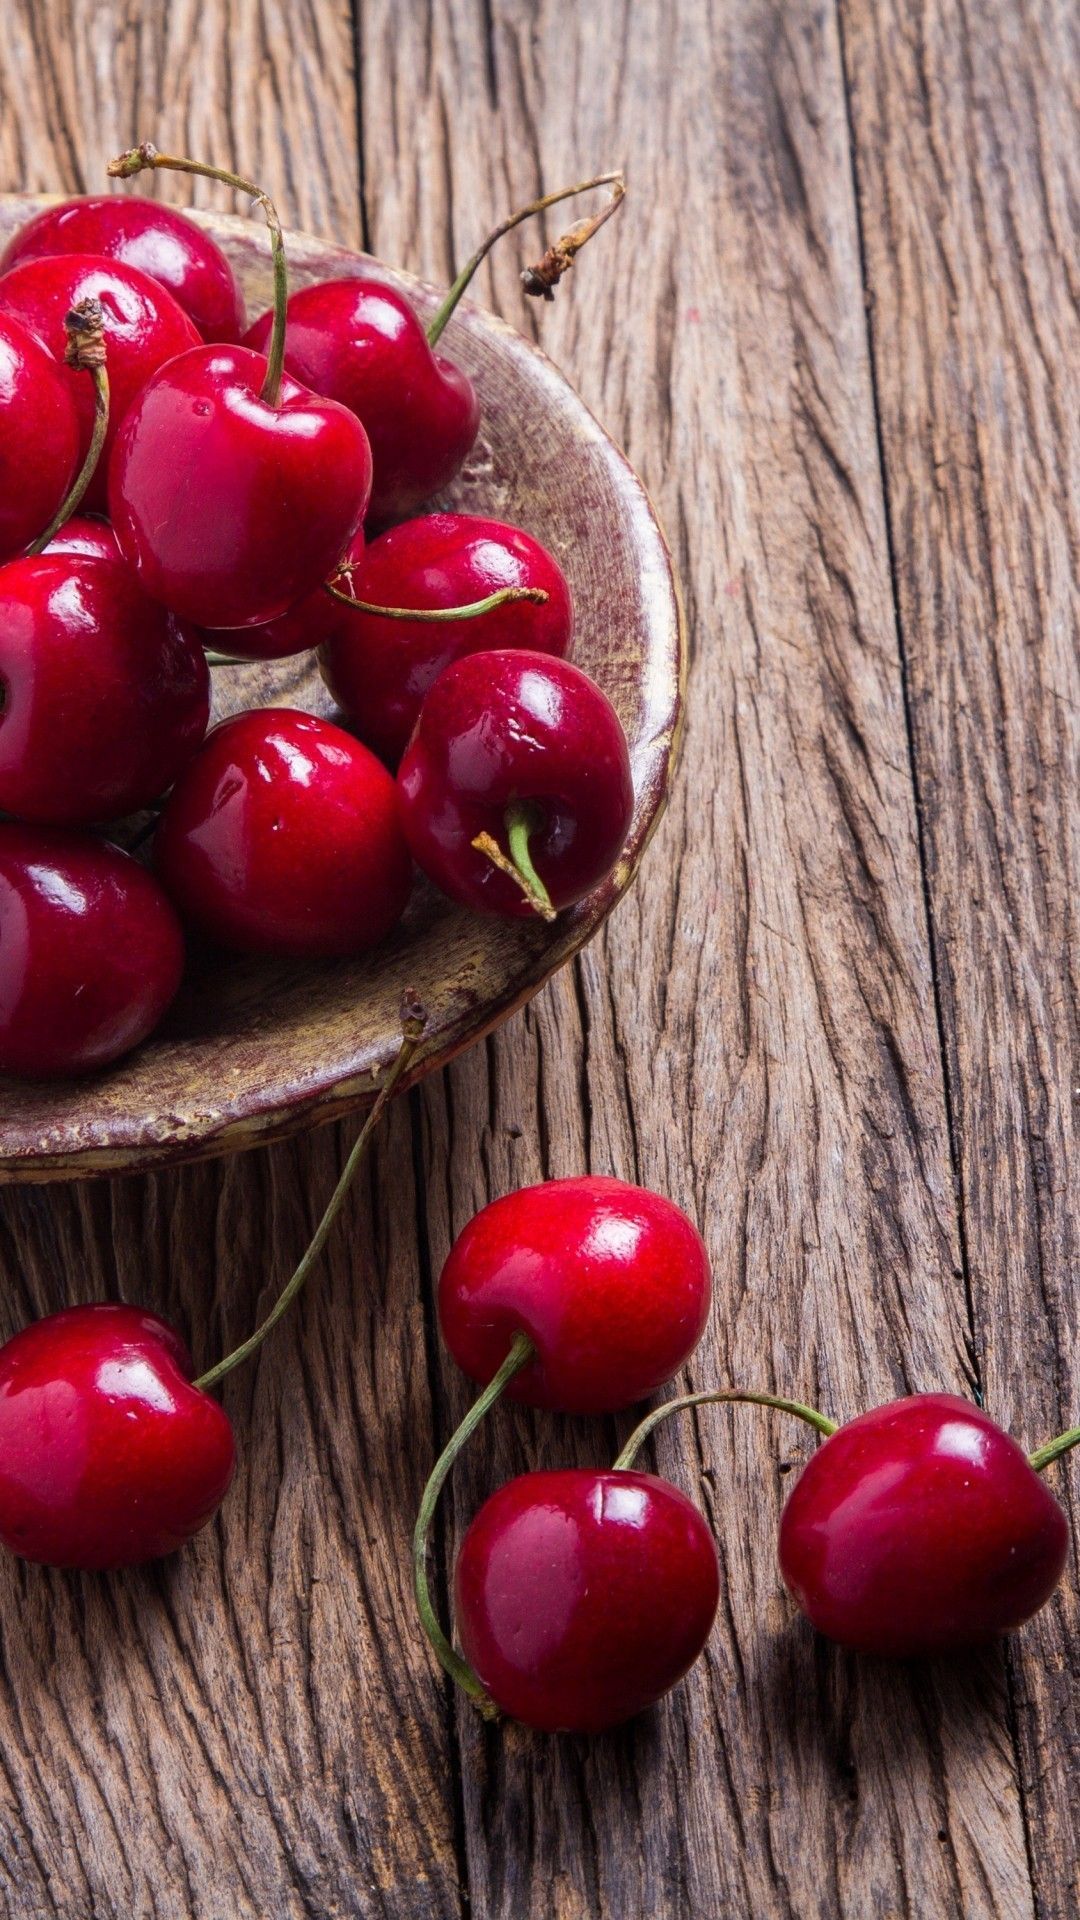 Iphone Wallpaper Background Cherry Images  Free Photos PNG Stickers  Wallpapers  Backgrounds  rawpixel